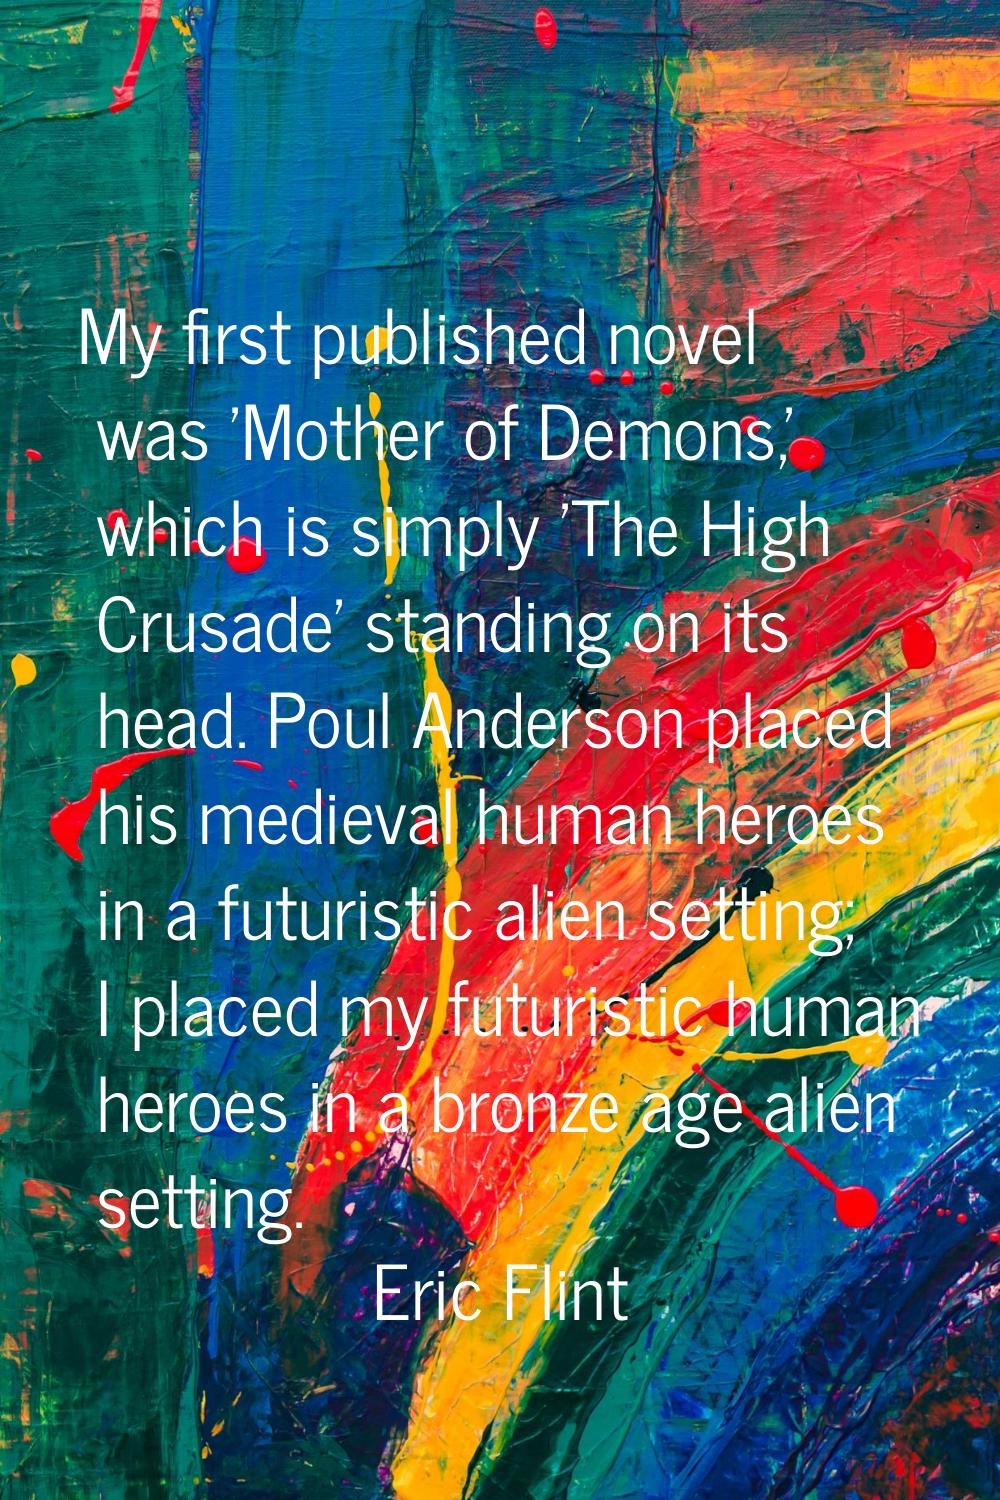 My first published novel was 'Mother of Demons,' which is simply 'The High Crusade' standing on its